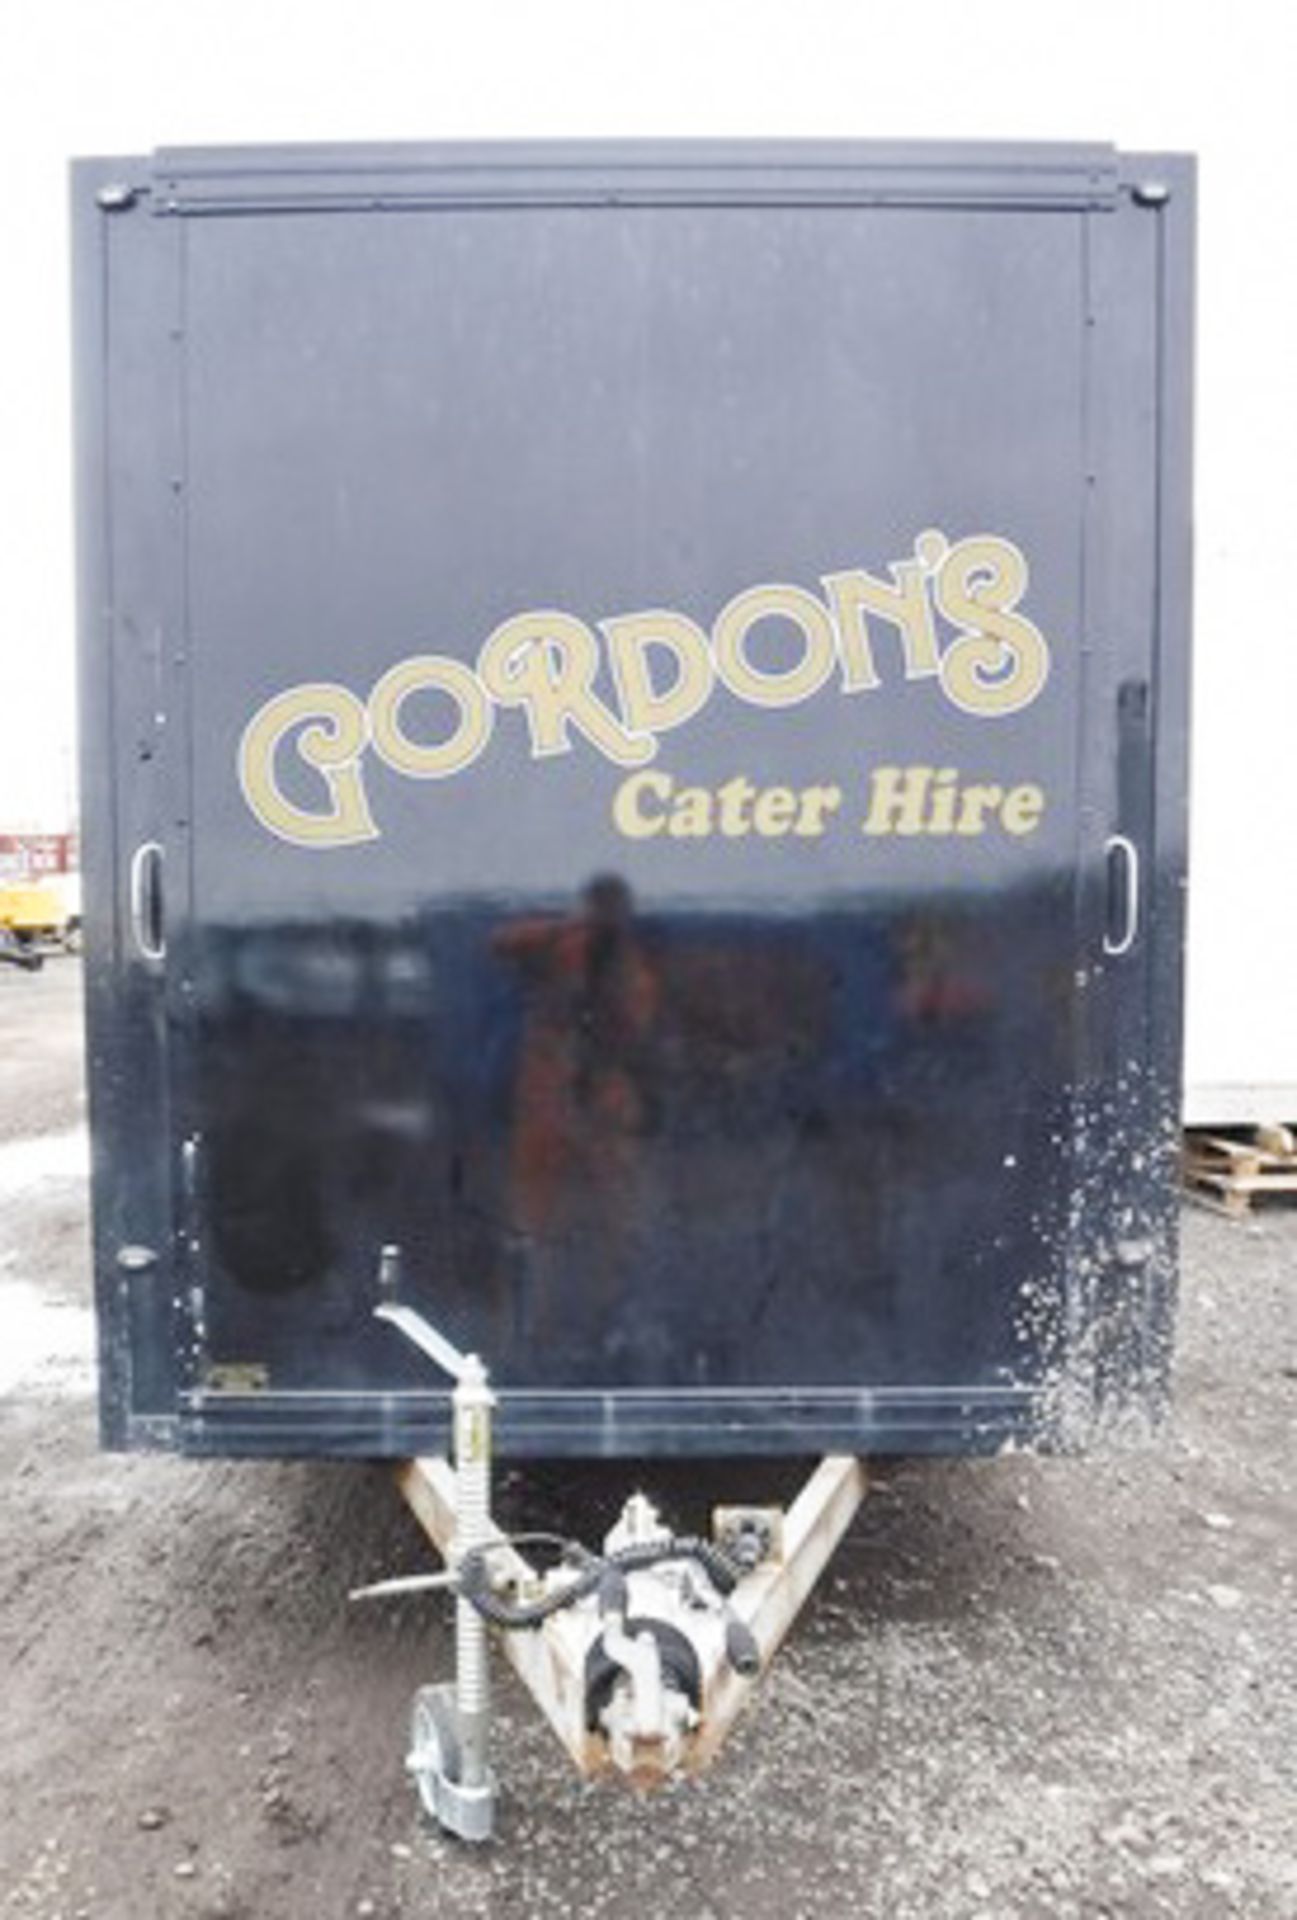 CATERING TRAILER 13FT2" LONG, 6FT WIDE, APPROX 7FT HIGH, 3500 GROSS, KEY IN OFFICE - Image 6 of 9